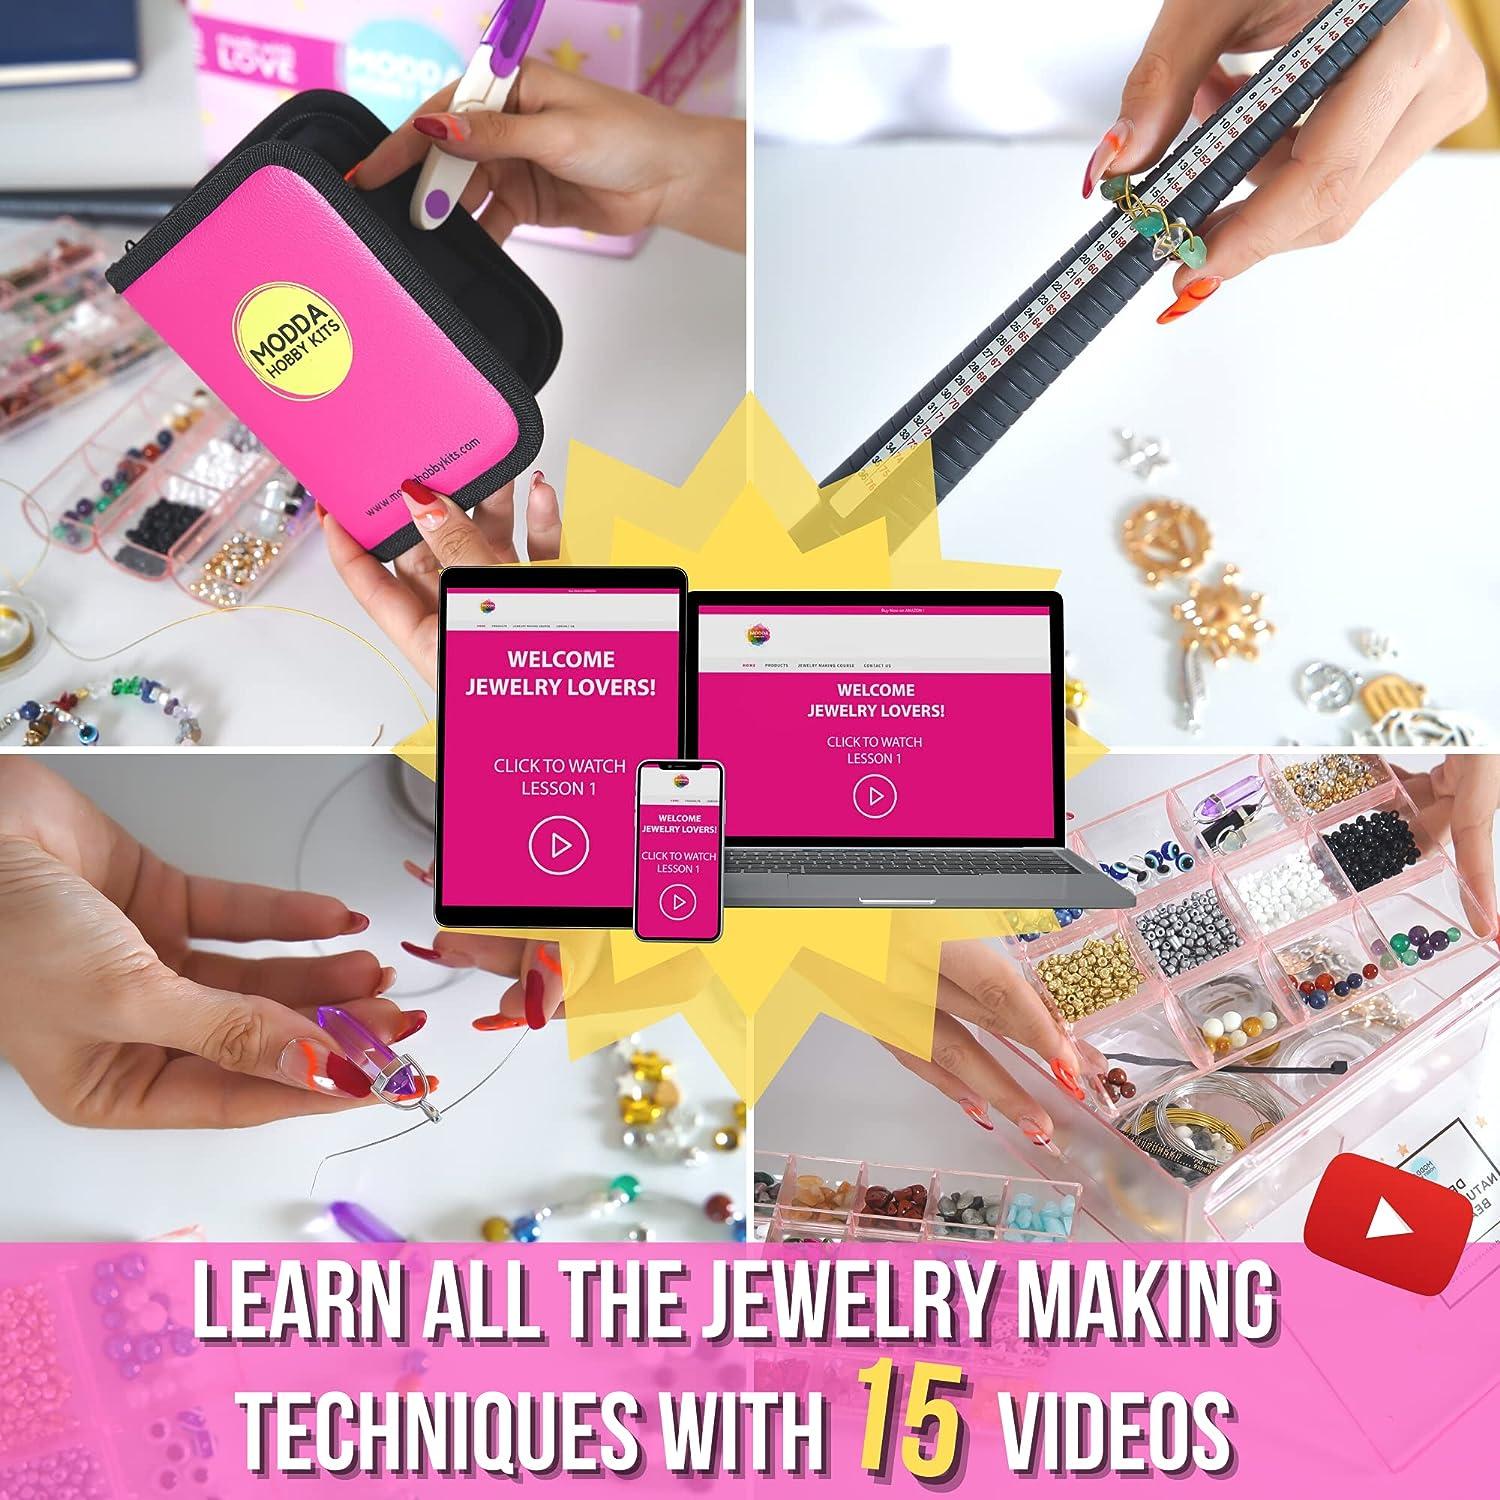 Modda Deluxe Jewelry Making Kit with Video Course, Includes